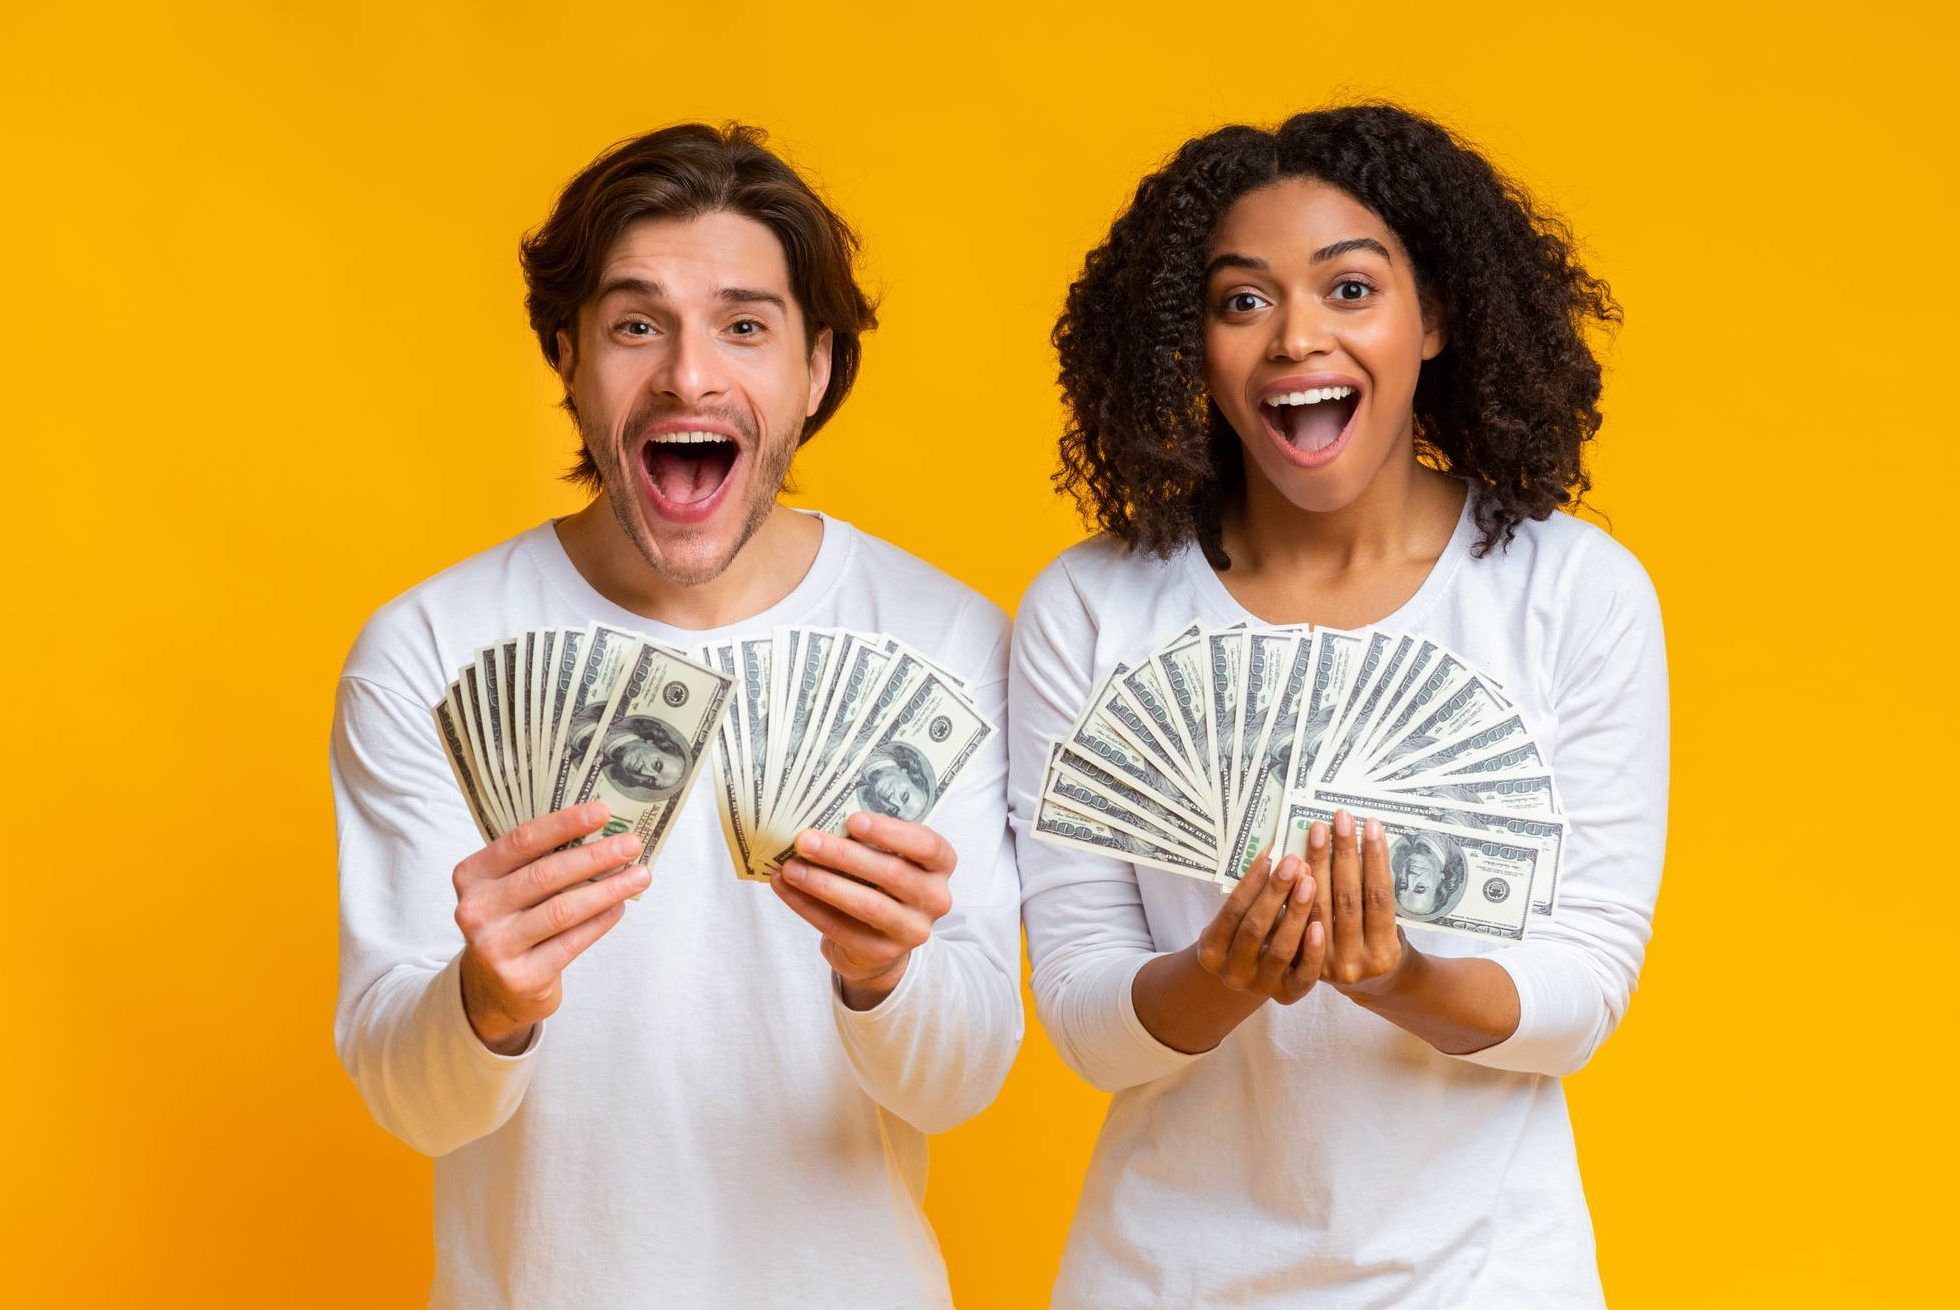 A man and woman hold fanned-out cash at arm's length in front of them as they stand against a yellow background, representing June settlement deadlines.